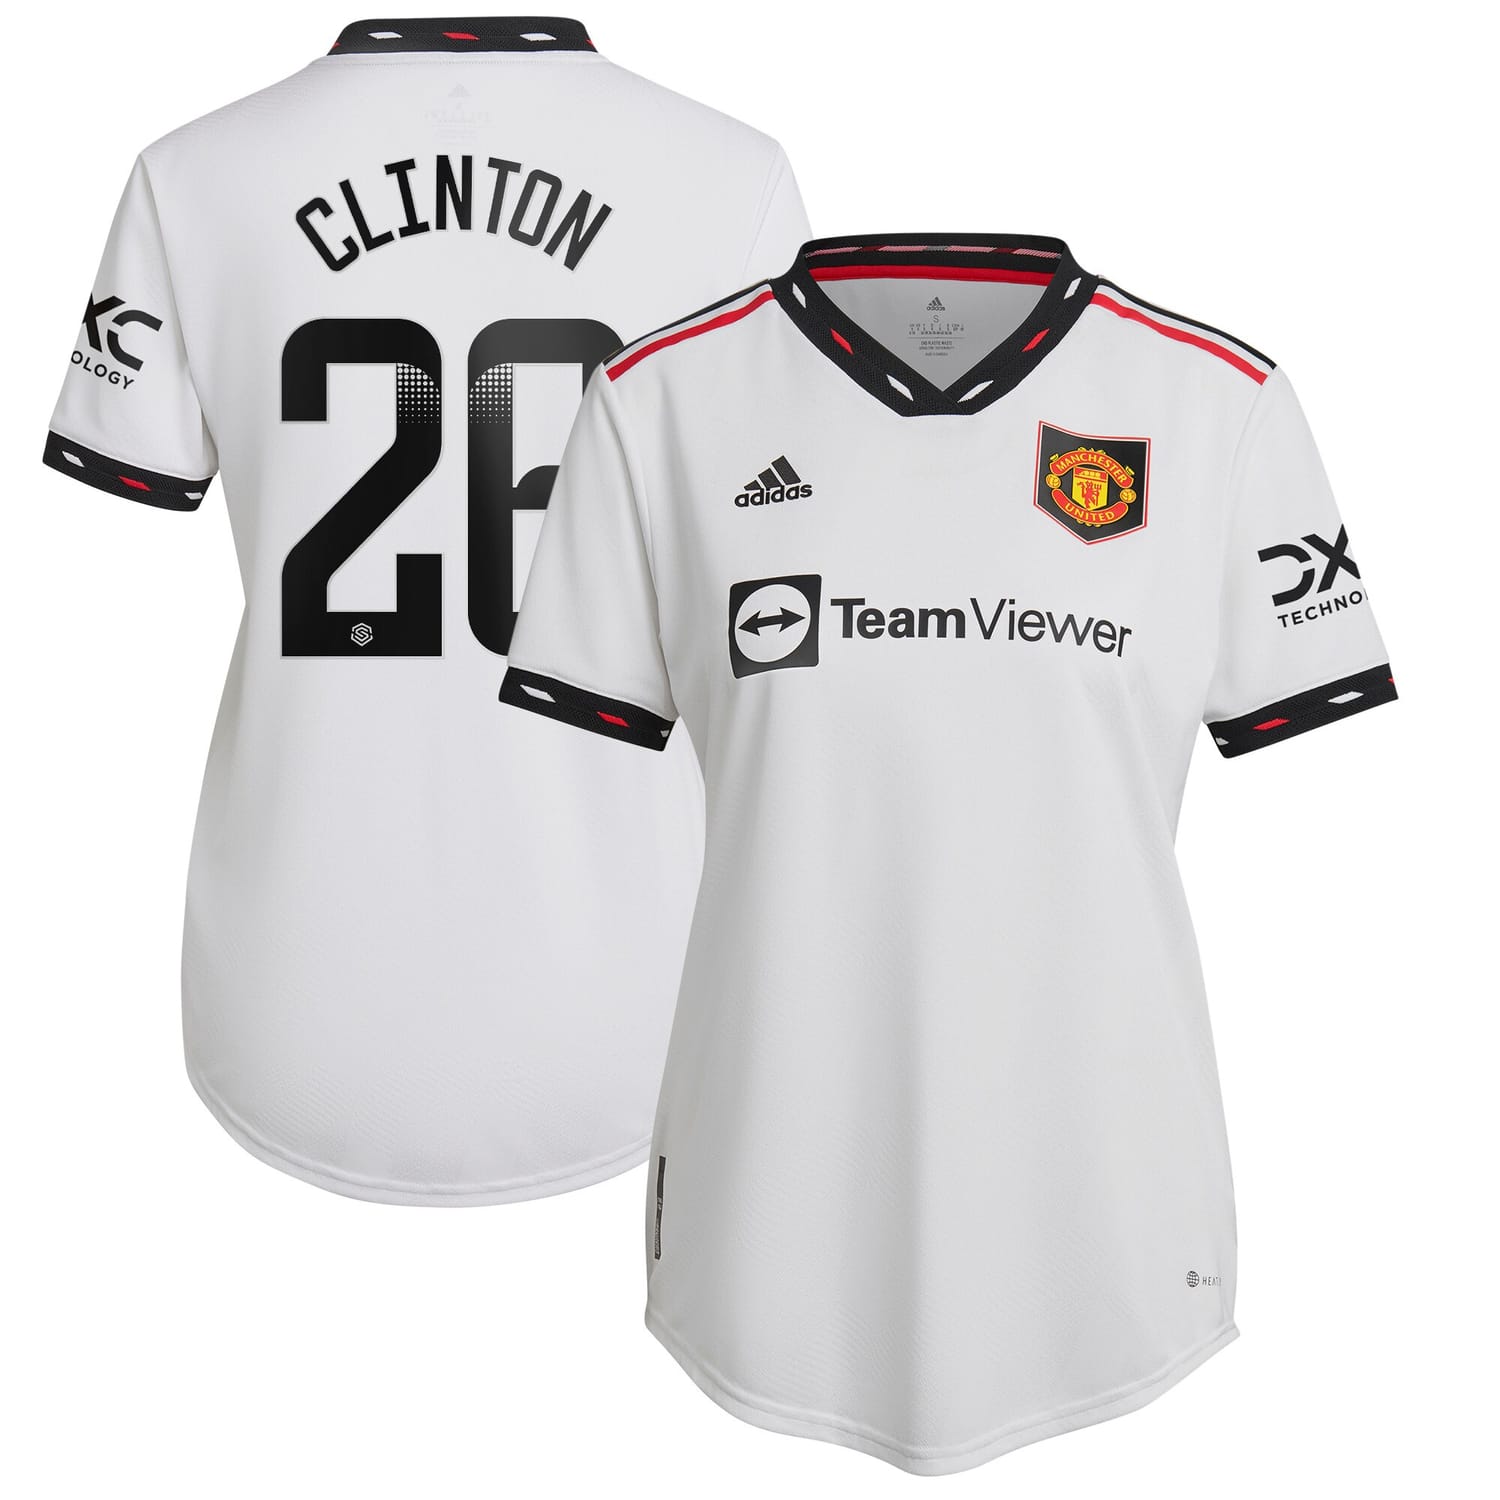 Premier League Manchester United Away WSL Authentic Jersey Shirt 2022-23 player Grace Clinton 26 printing for Women